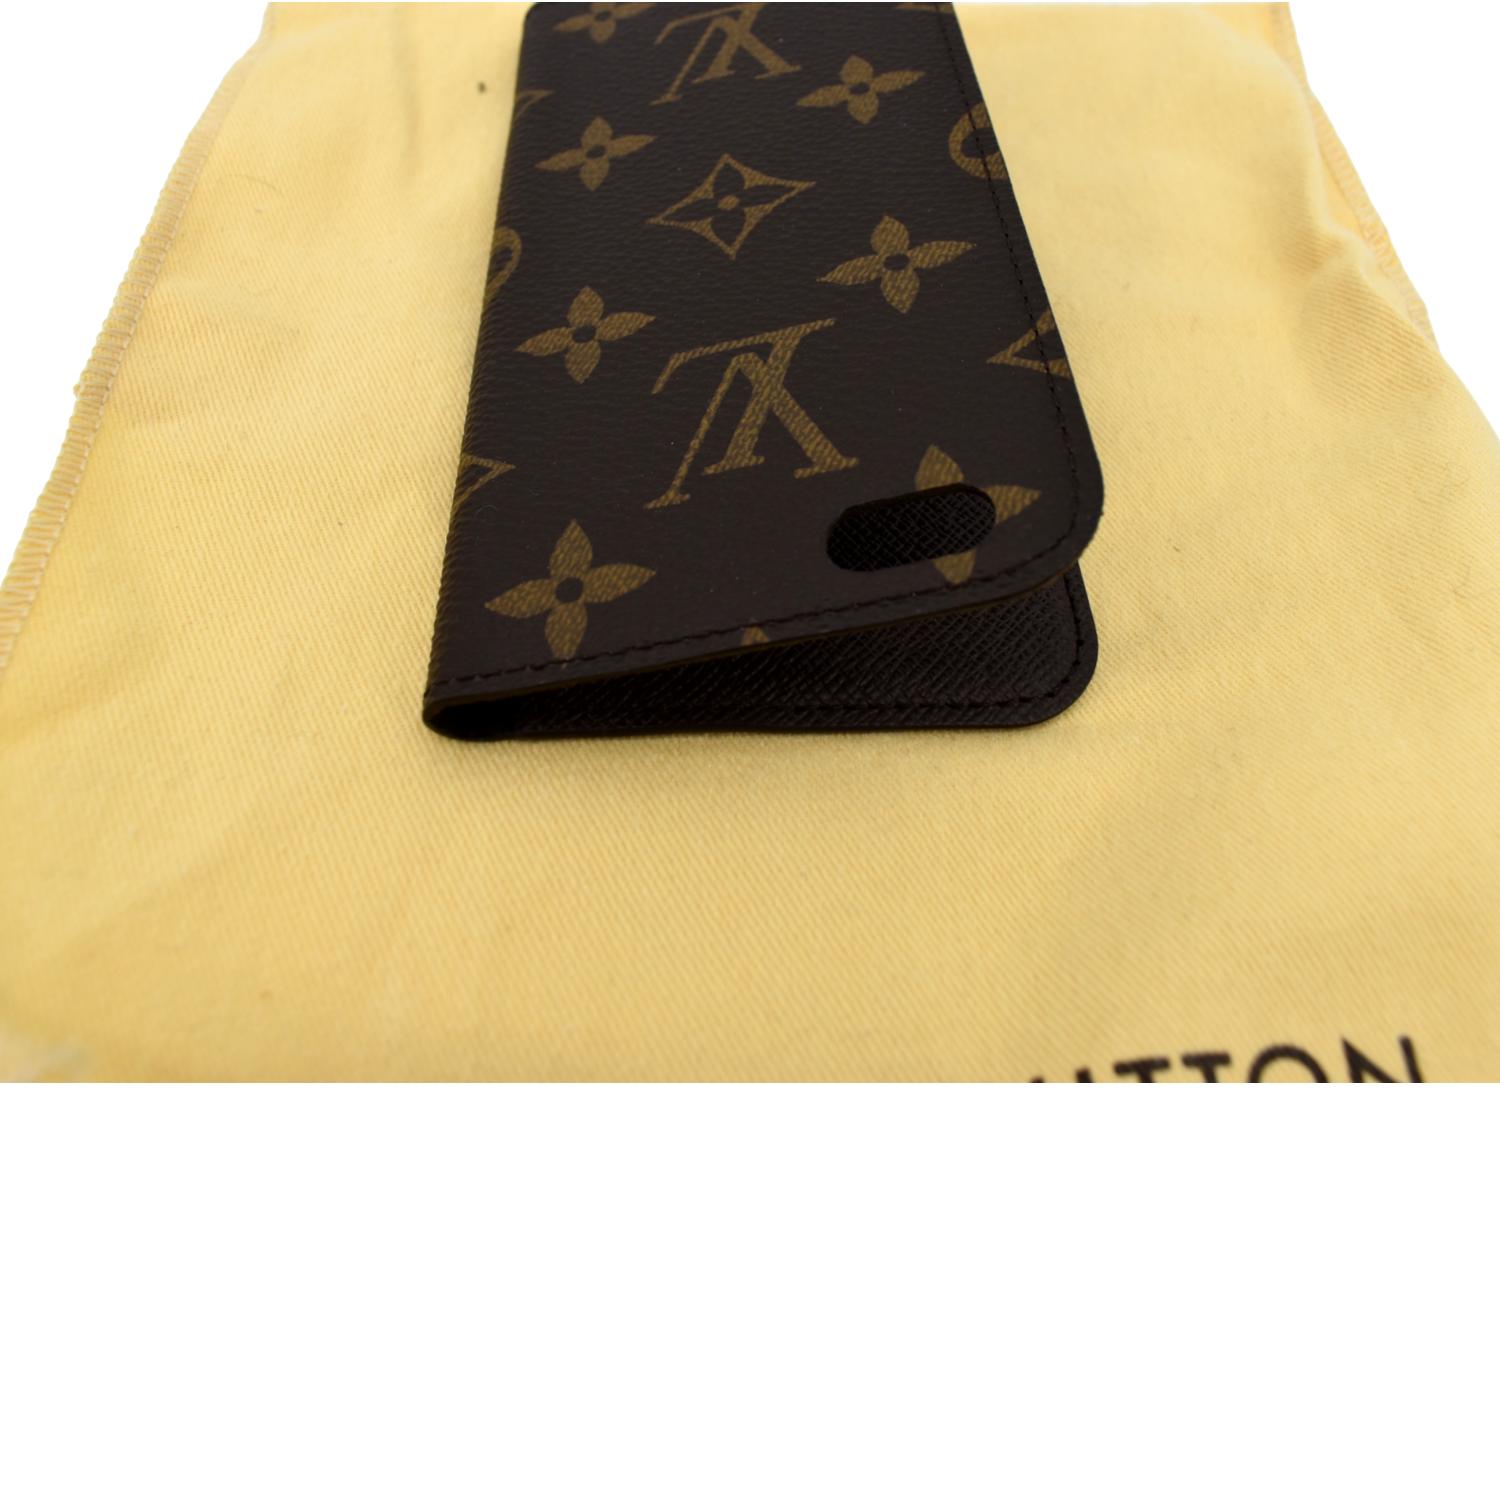 Small brown LV letter phone case